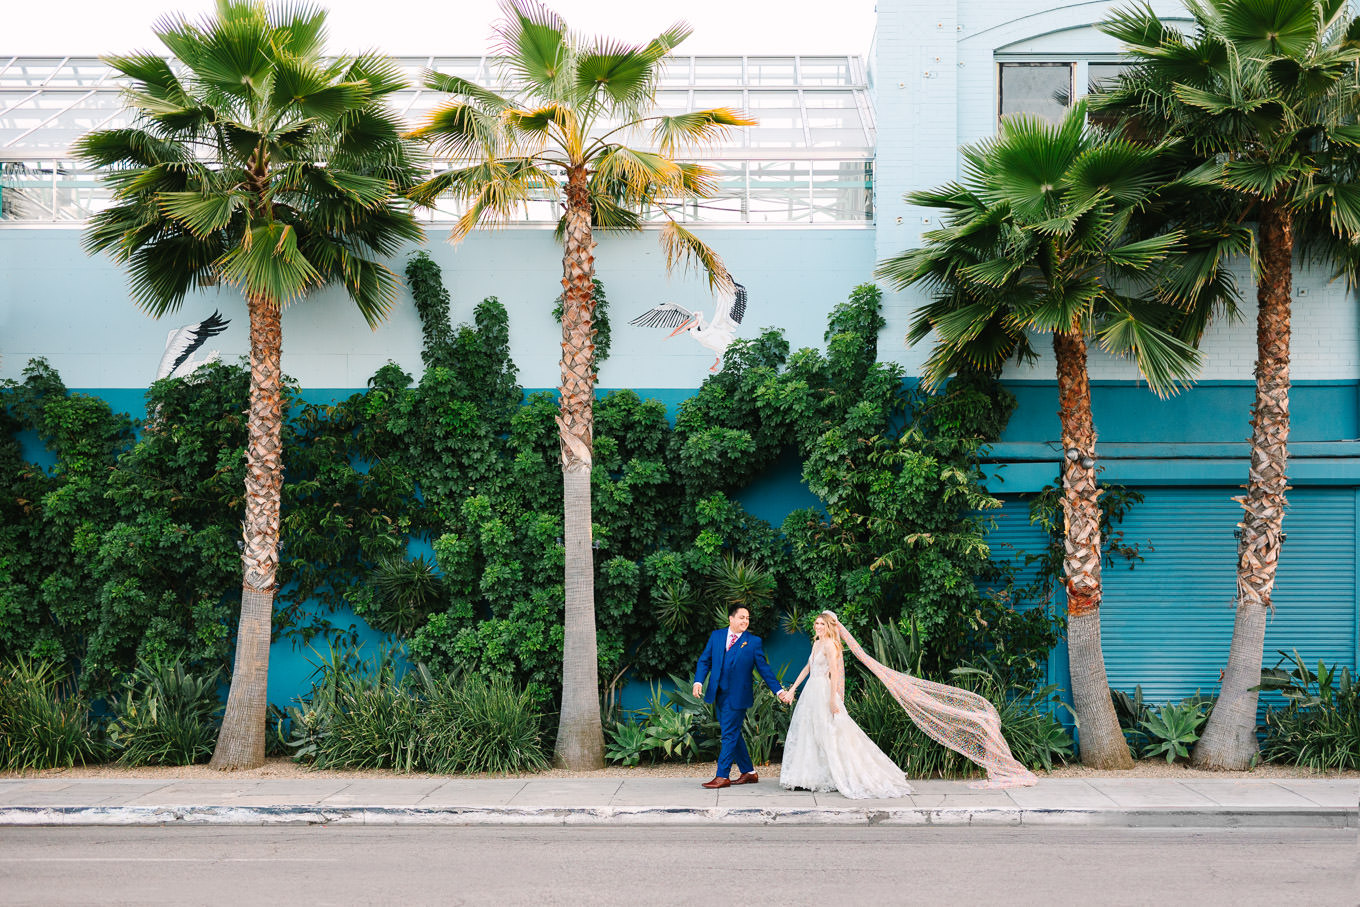 Grass Room Los Angeles wedding | Wedding and elopement photography roundup | Los Angeles and Palm Springs photographer | #losangeleswedding #palmspringswedding #elopementphotographer Source: Mary Costa Photography | Los Angeles